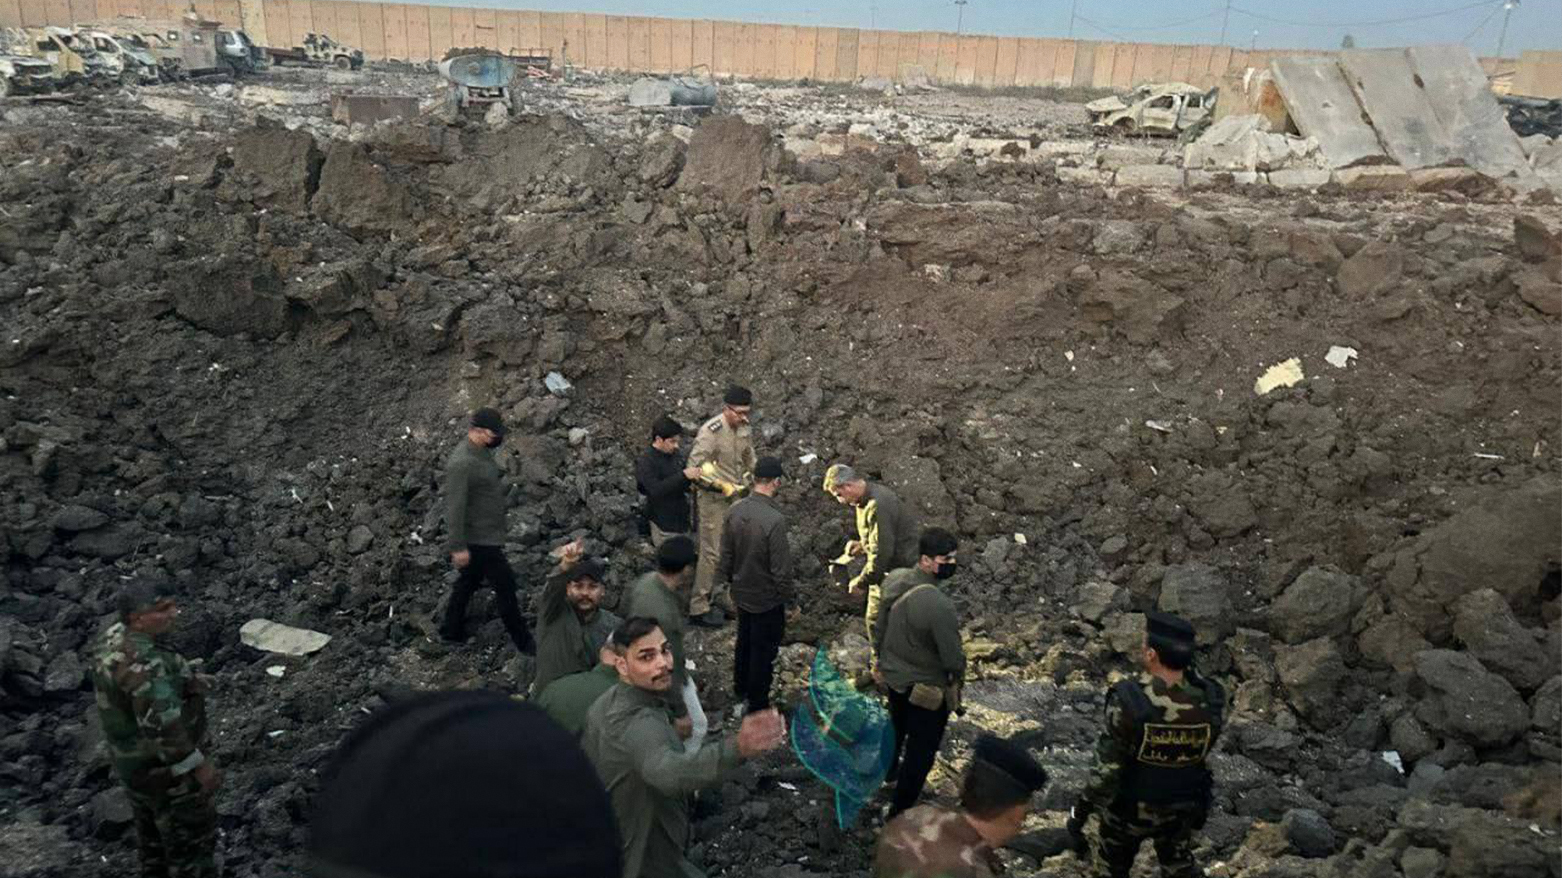 The photo shows the aftermath of the explosions at the Kalsu Military Base in Babil, Iraq. (Photo: PMF)